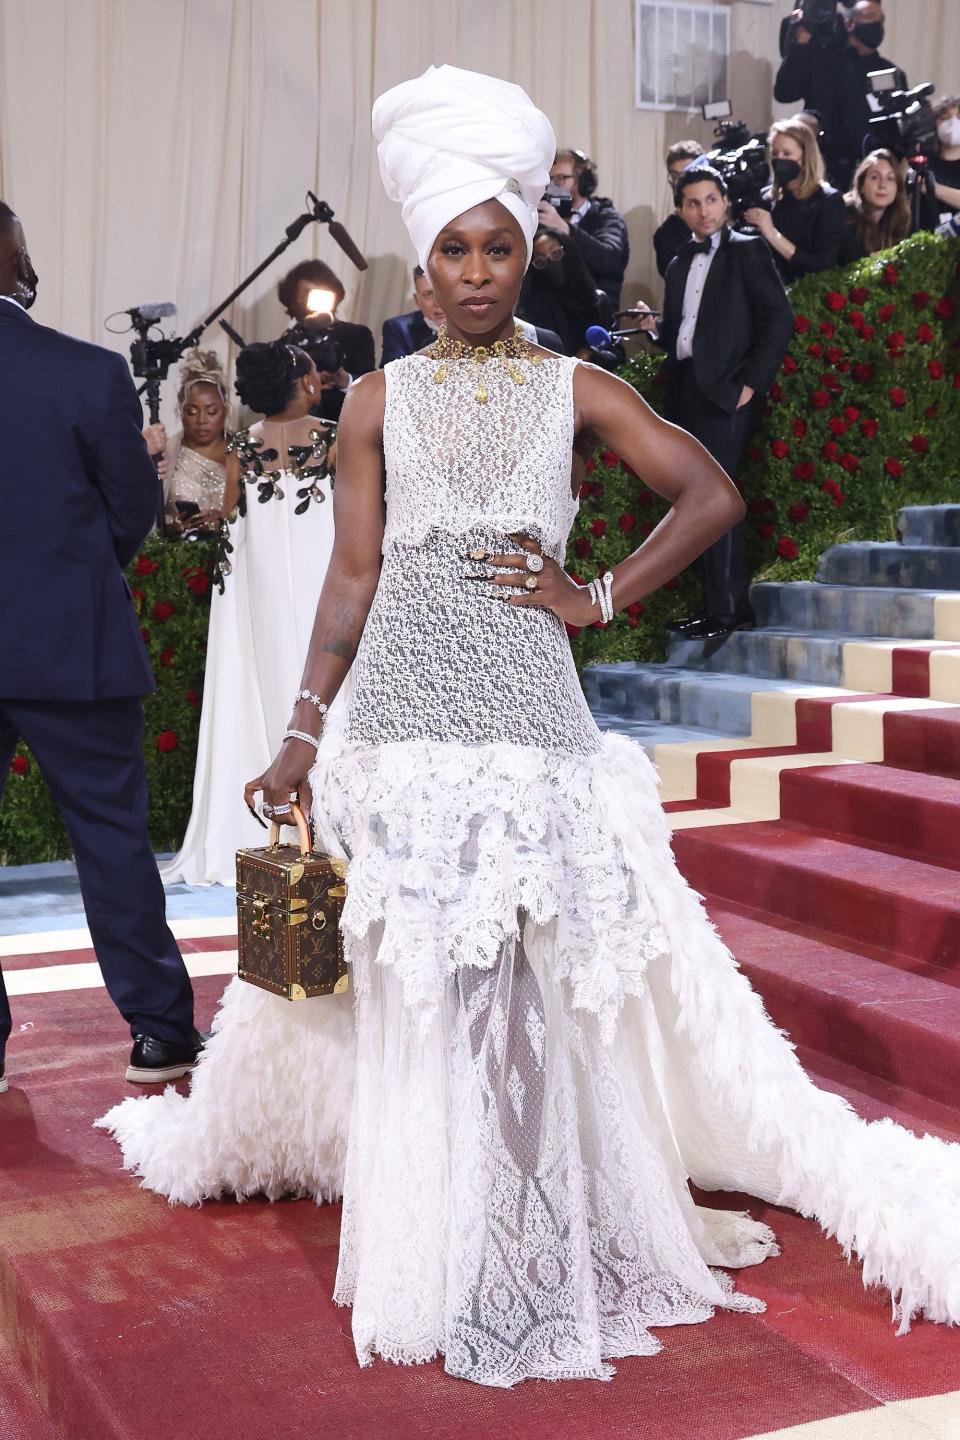 Cynthia in a large white wrapped headdress. She's wearing a shear white lace high neck dress that flares into ruffles and a feather train at her hips. She's holding a small brown Louis Vuitton boxy bag.